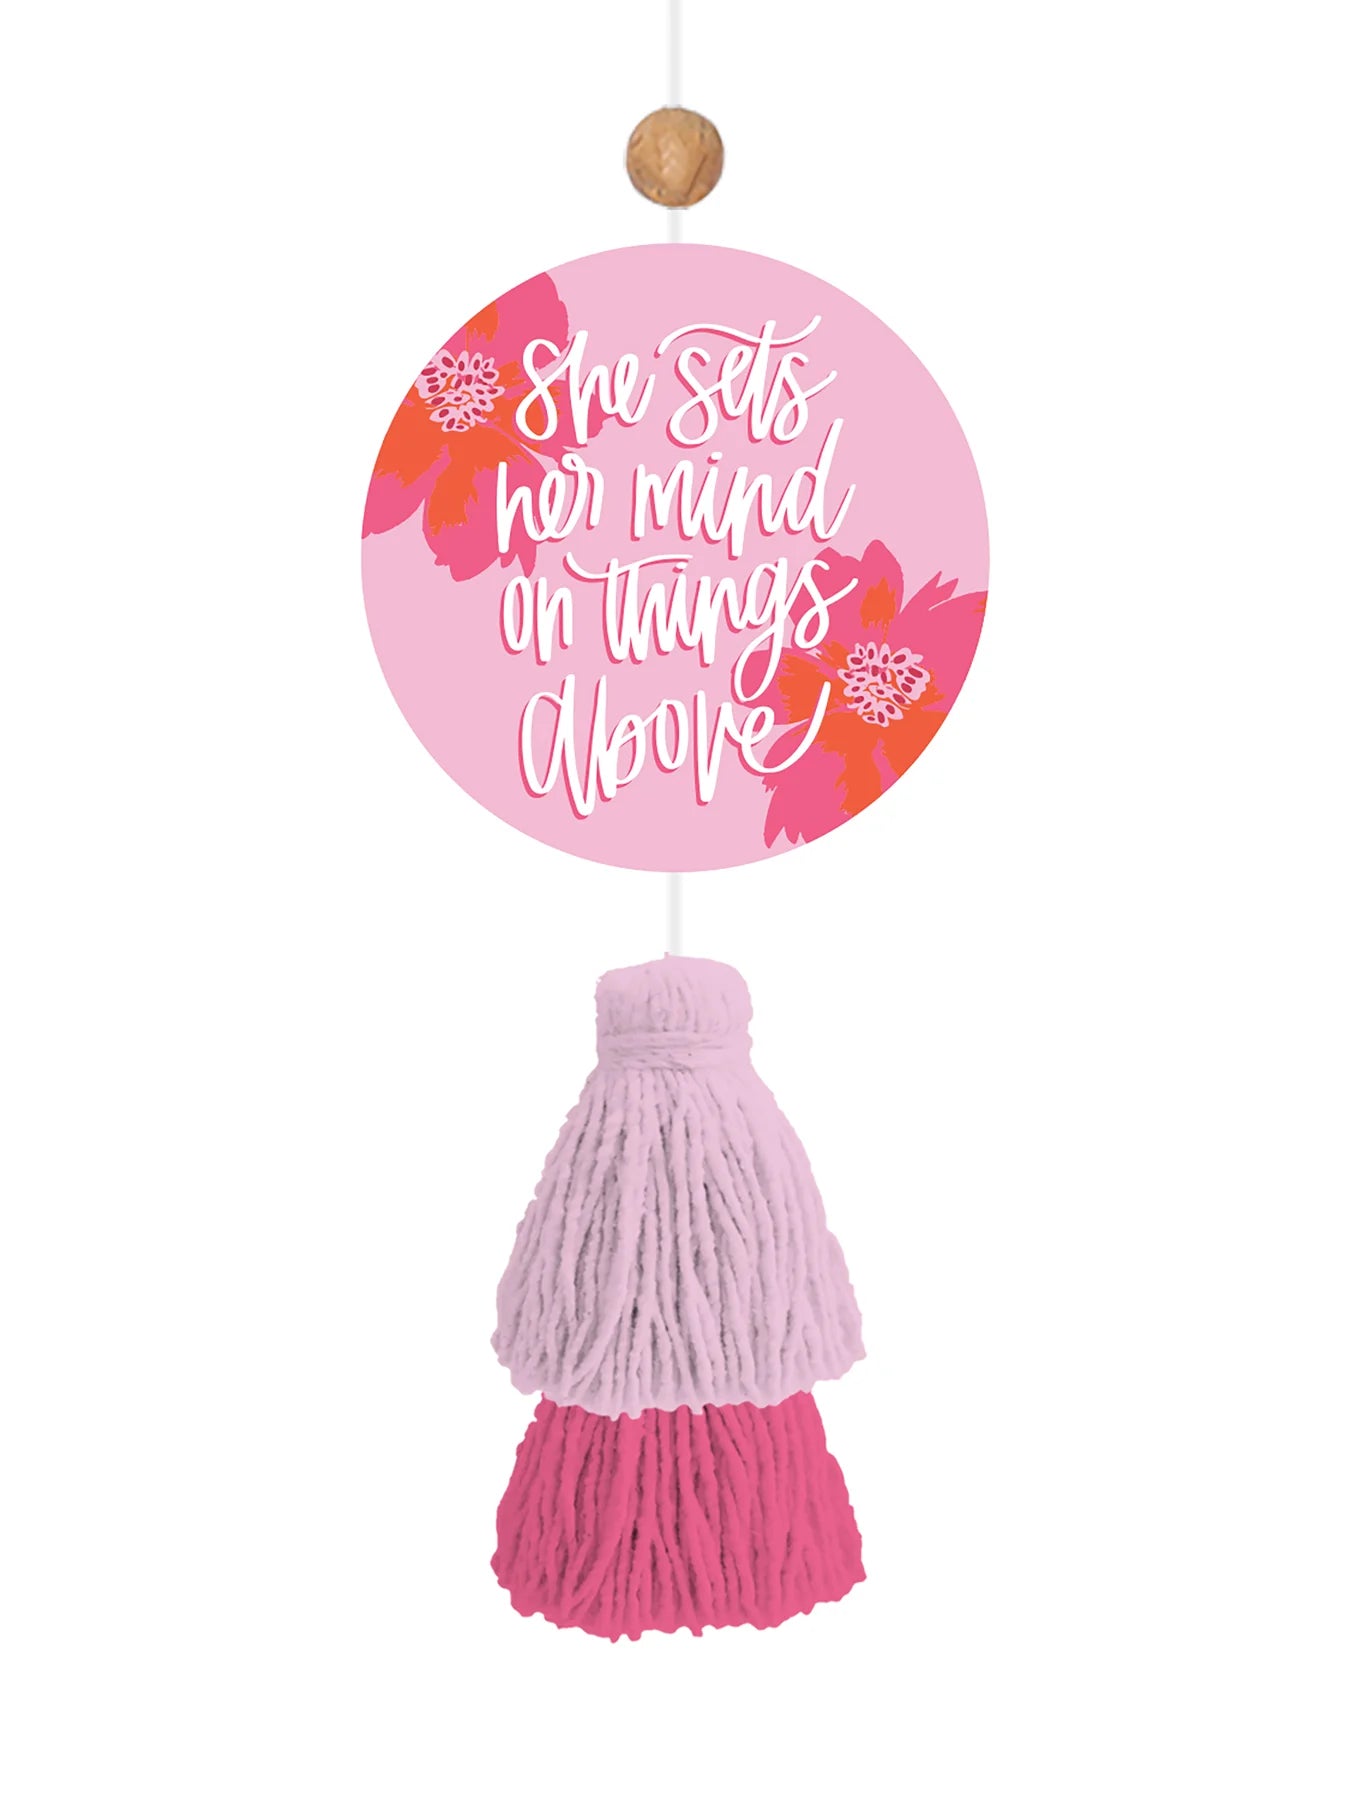 Mary Square Air Freshener | She Sets Her Mind